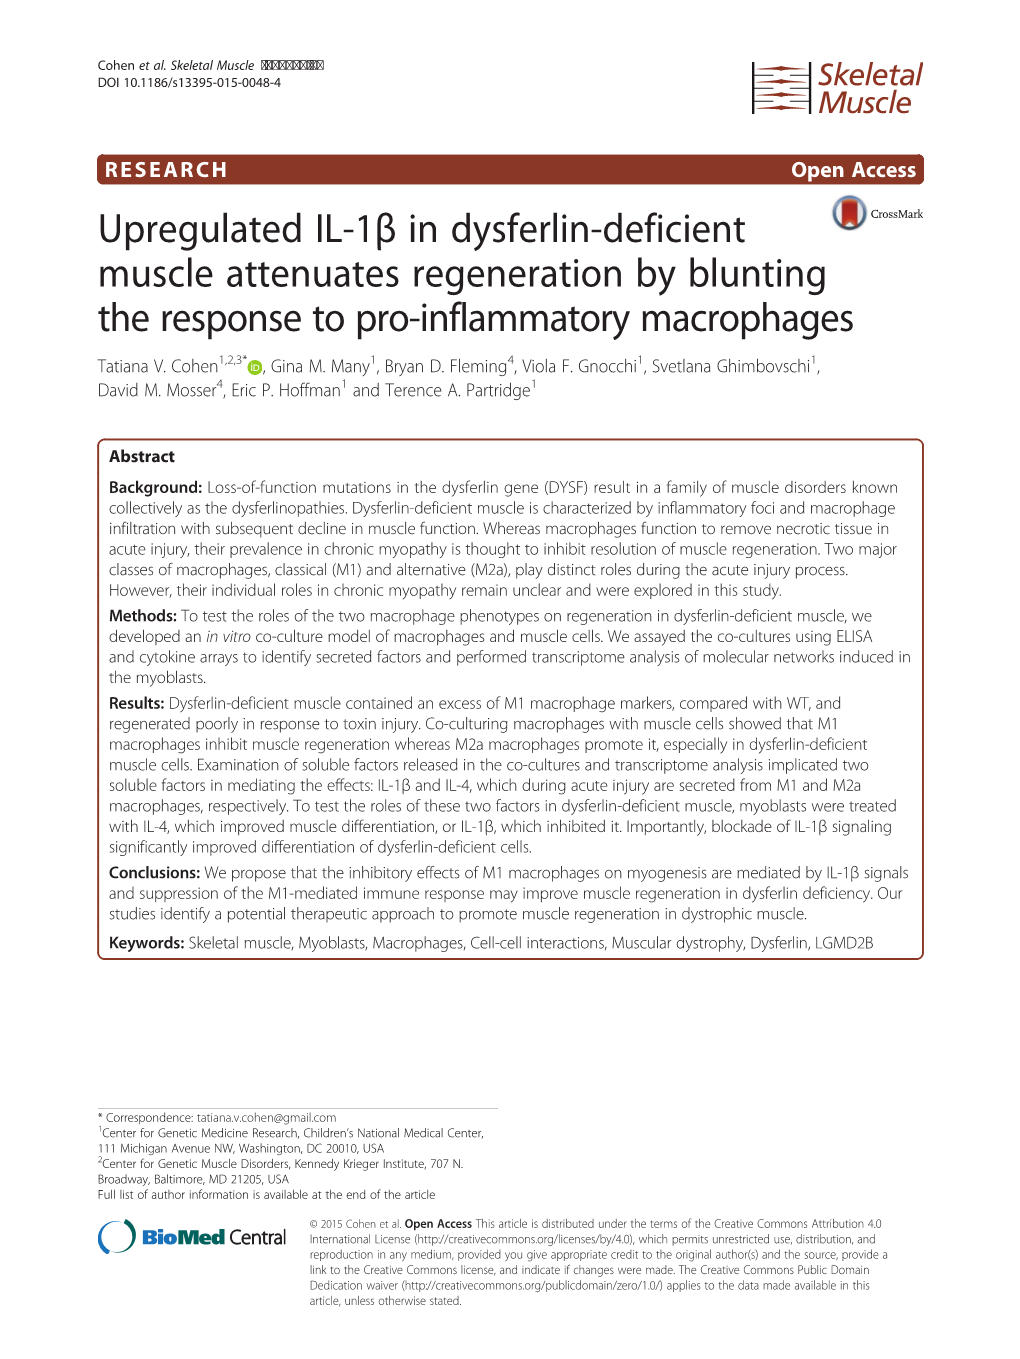 Upregulated IL-1Β in Dysferlin-Deficient Muscle Attenuates Regeneration by Blunting the Response to Pro-Inflammatory Macrophages Tatiana V